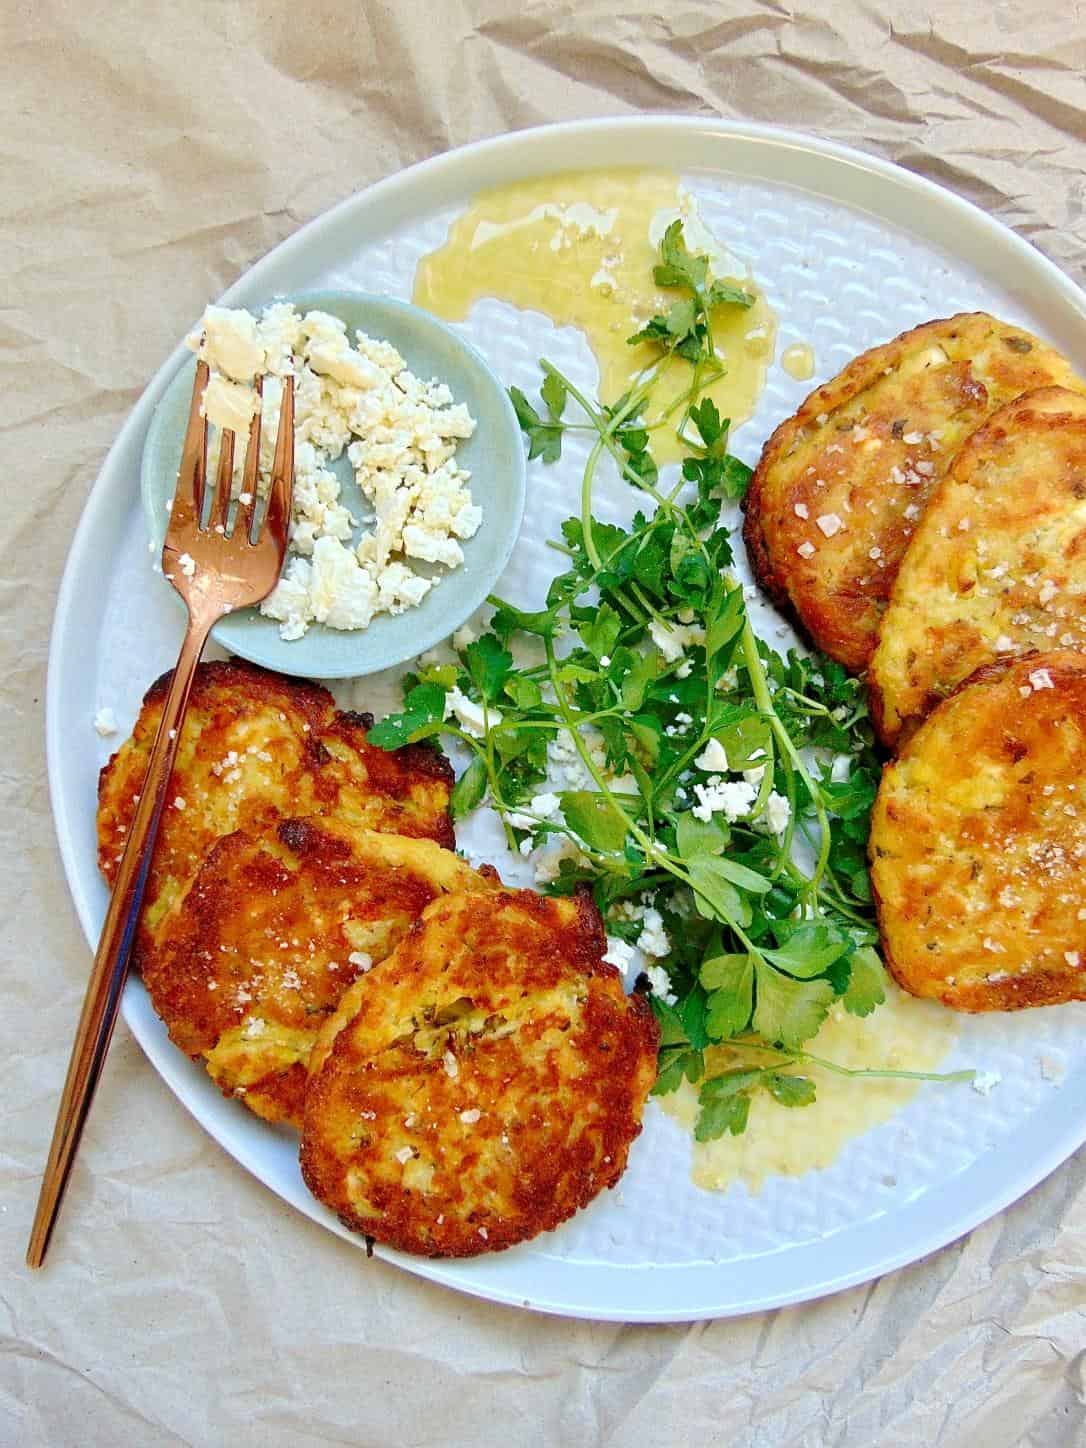  A potato cake that is perfectly crispy on the outside and soft on the inside, with a hint of saltiness from the feta and a pop of freshness from the parsley.